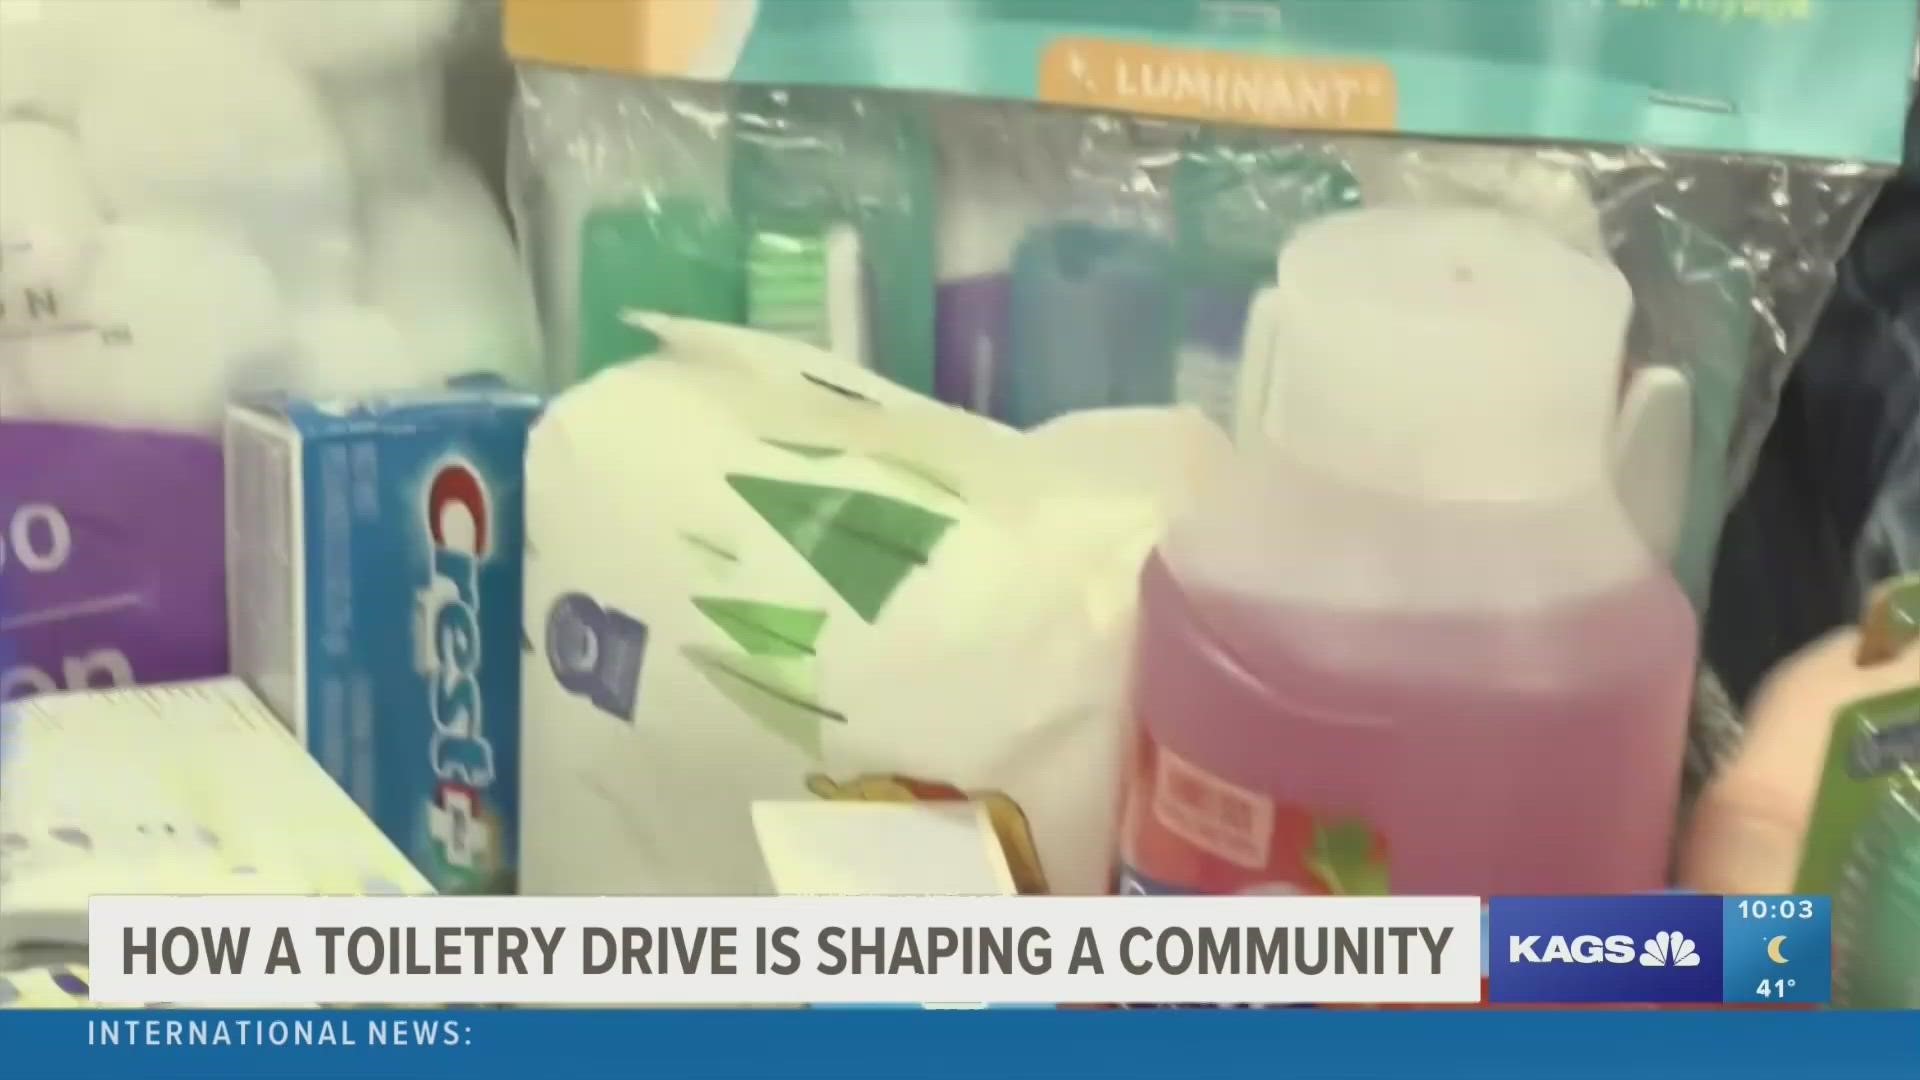 Madisonville Elementary School started a toiletry drive back in 2020 to teach their students that making an impact can be as simple as donating toiletries.